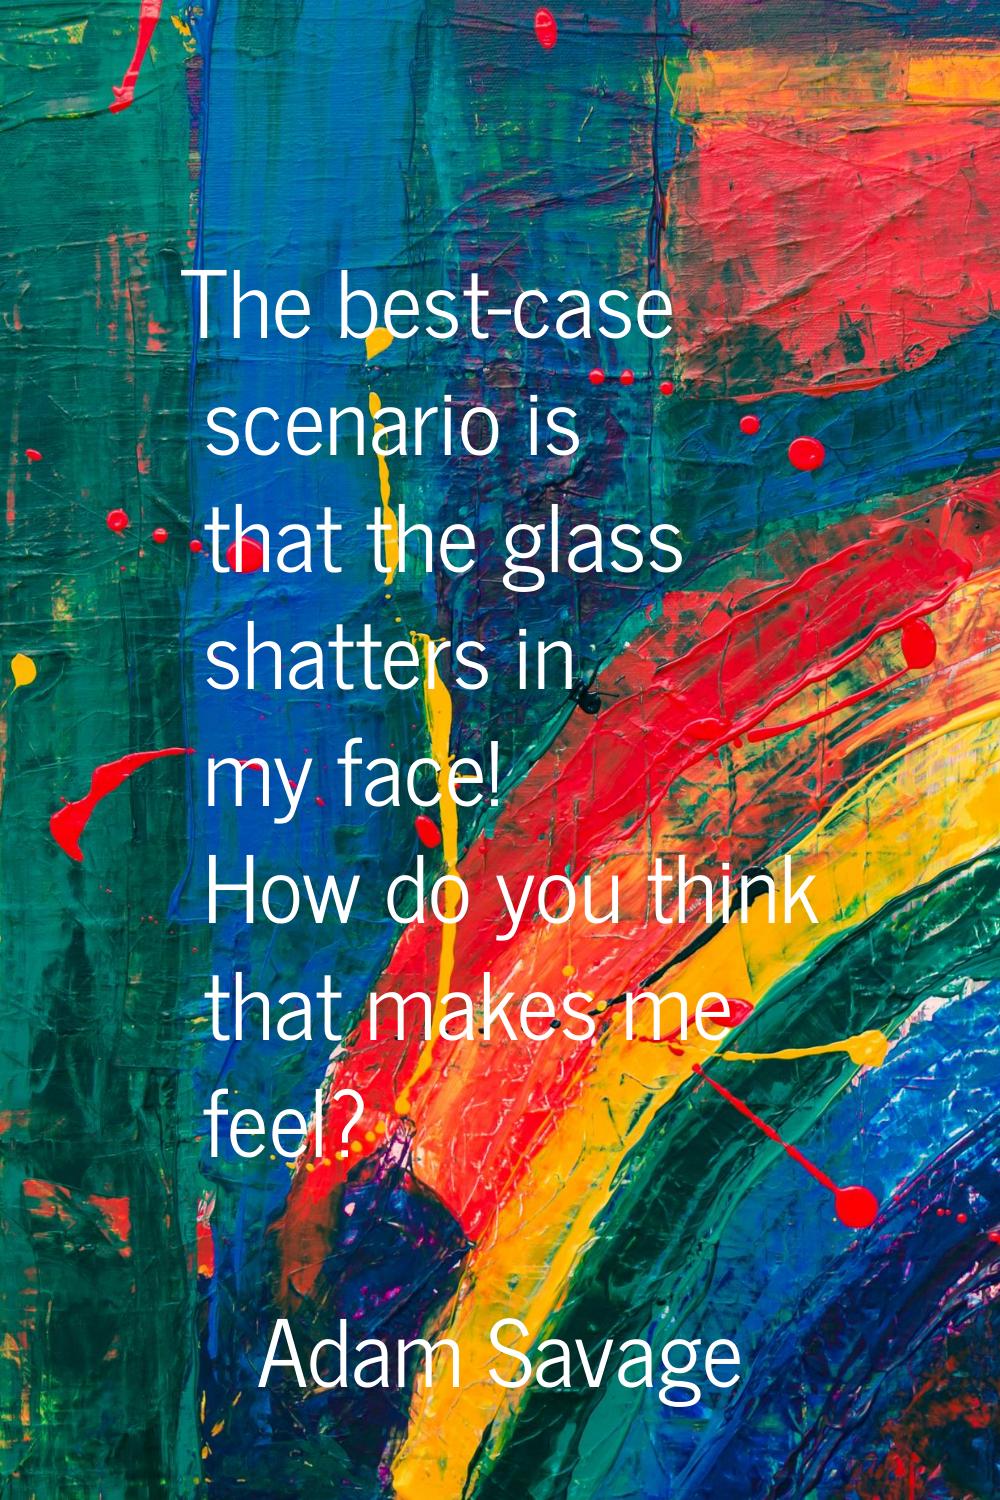 The best-case scenario is that the glass shatters in my face! How do you think that makes me feel?